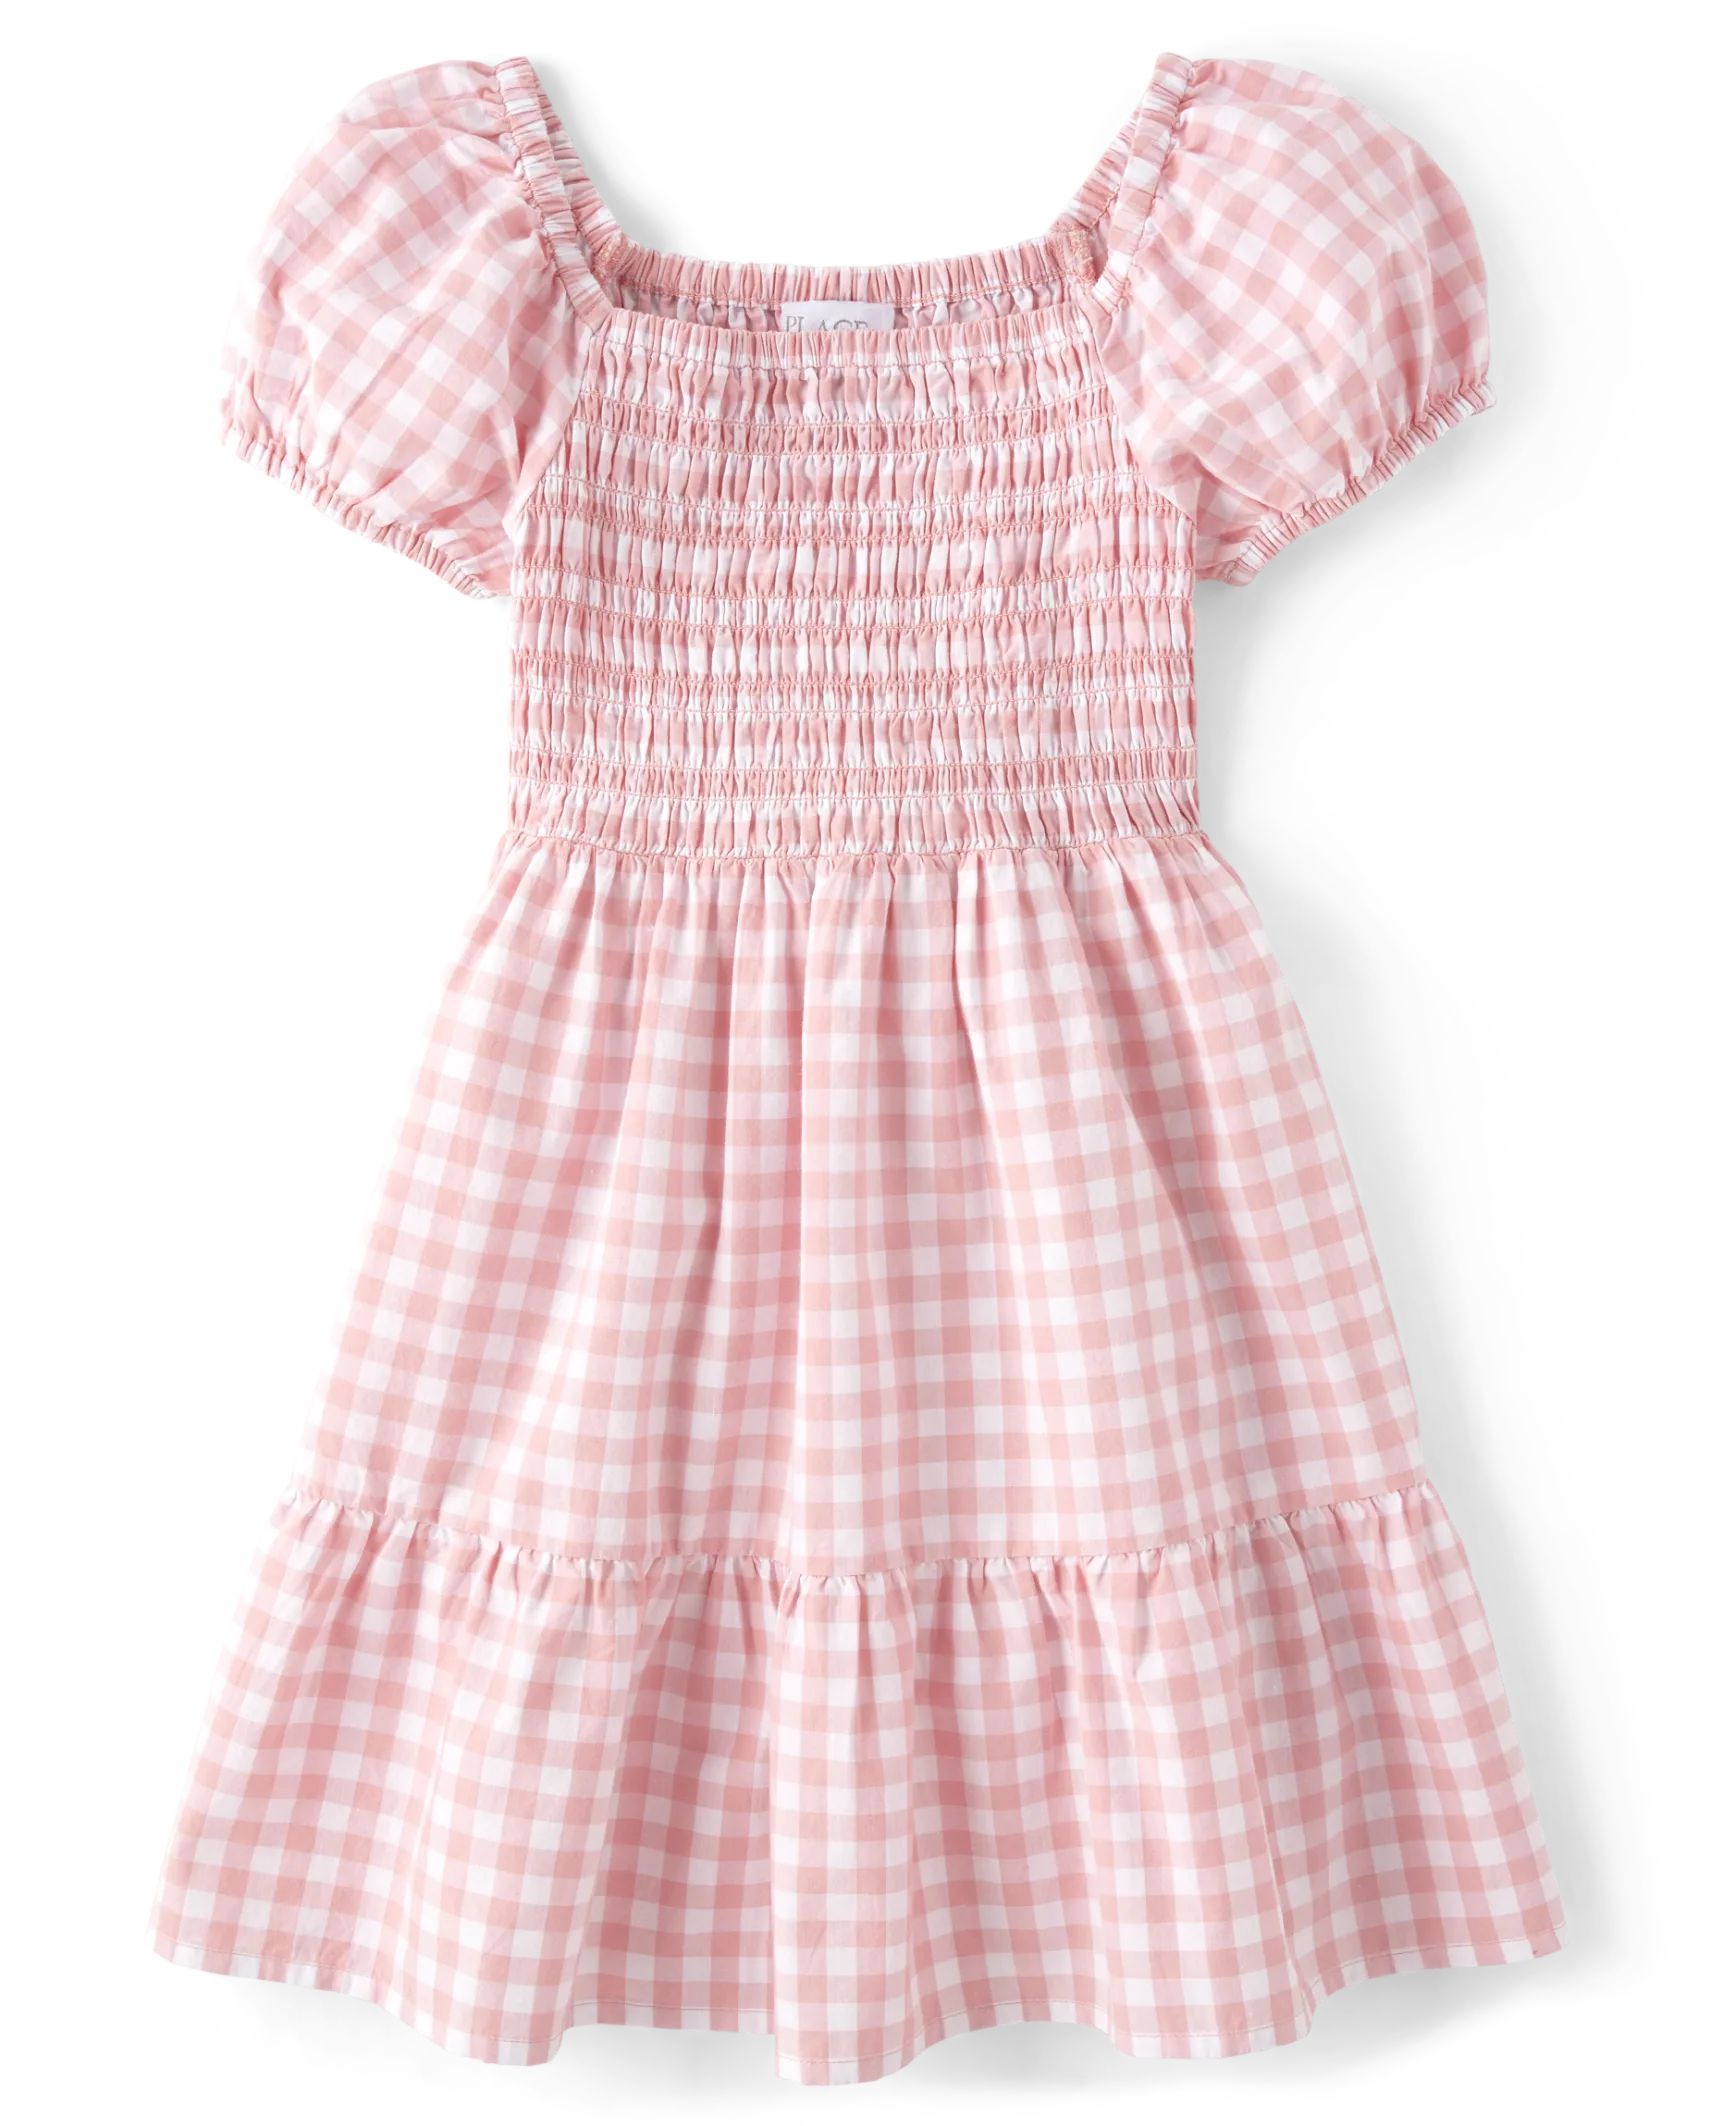 Girls Mommy And Me Gingham Poplin Tiered Dress - rose petal | The Children's Place